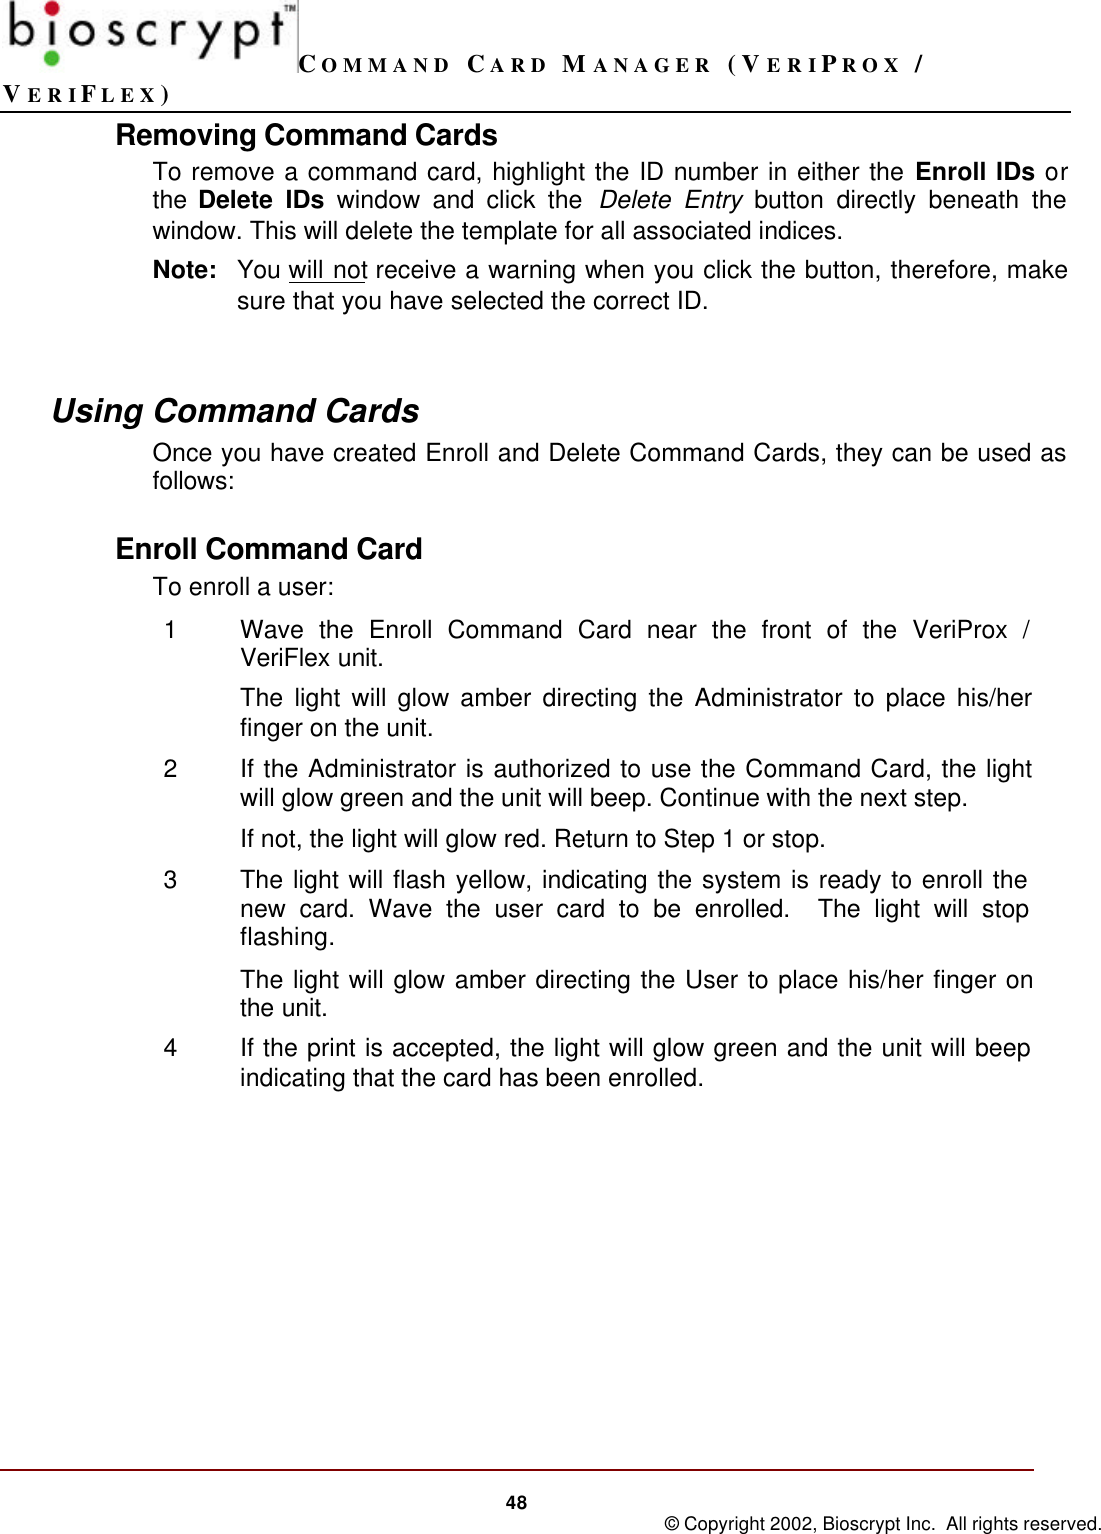 COMMAND CARD MANAGER (VERIPROX /VERIFLEX)48 © Copyright 2002, Bioscrypt Inc.  All rights reserved.Removing Command CardsTo remove a command card, highlight the ID number in either the Enroll IDs orthe Delete IDs window and click the Delete Entry button directly beneath thewindow. This will delete the template for all associated indices.Note: You will not receive a warning when you click the button, therefore, makesure that you have selected the correct ID.Using Command CardsOnce you have created Enroll and Delete Command Cards, they can be used asfollows:Enroll Command CardTo enroll a user:1Wave the Enroll Command Card near the front of the VeriProx /VeriFlex unit.The light will glow amber directing the Administrator to place his/herfinger on the unit.2If the Administrator is authorized to use the Command Card, the lightwill glow green and the unit will beep. Continue with the next step.If not, the light will glow red. Return to Step 1 or stop.3The light will flash yellow, indicating the system is ready to enroll thenew card. Wave the user card to be enrolled.  The light will stopflashing.The light will glow amber directing the User to place his/her finger onthe unit.4If the print is accepted, the light will glow green and the unit will beepindicating that the card has been enrolled.